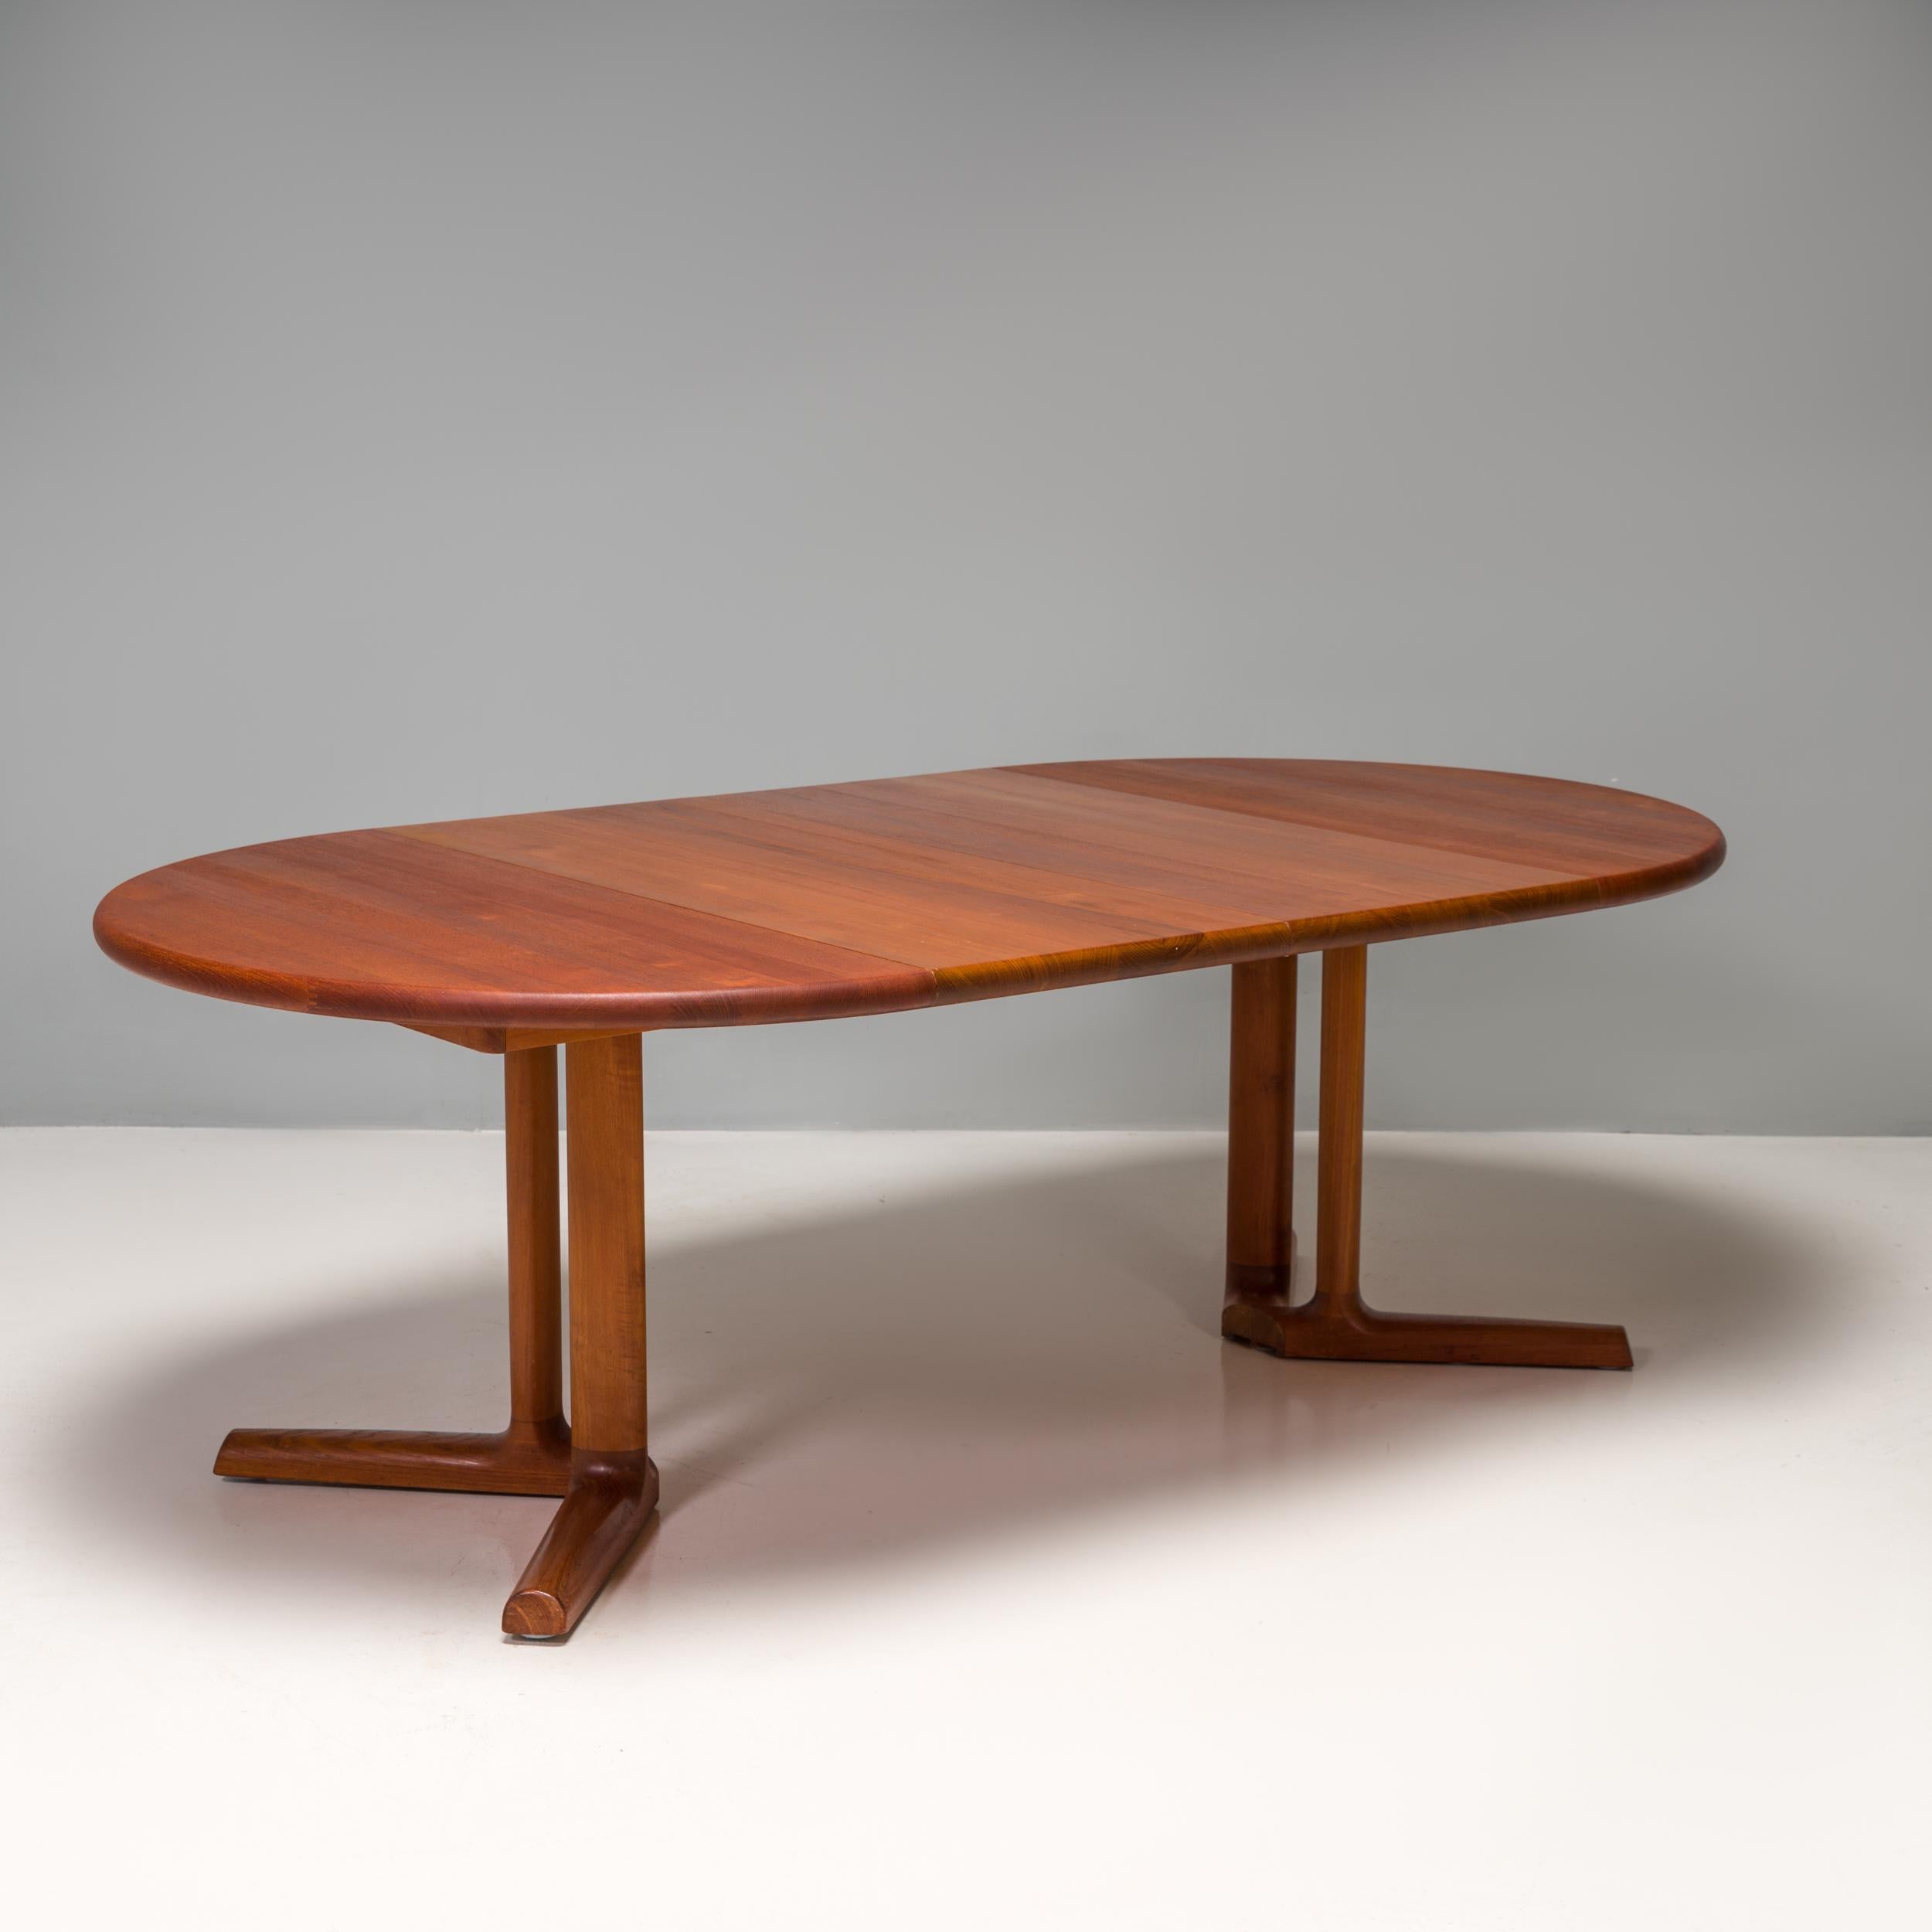 Designed and made by Dyrland in Denmark, this dining table is a Classic example of Mid-Century Modern design.

Constructed from teak, the dining table has a circular table top sitting on two sets of v-shaped legs, which create a four star base